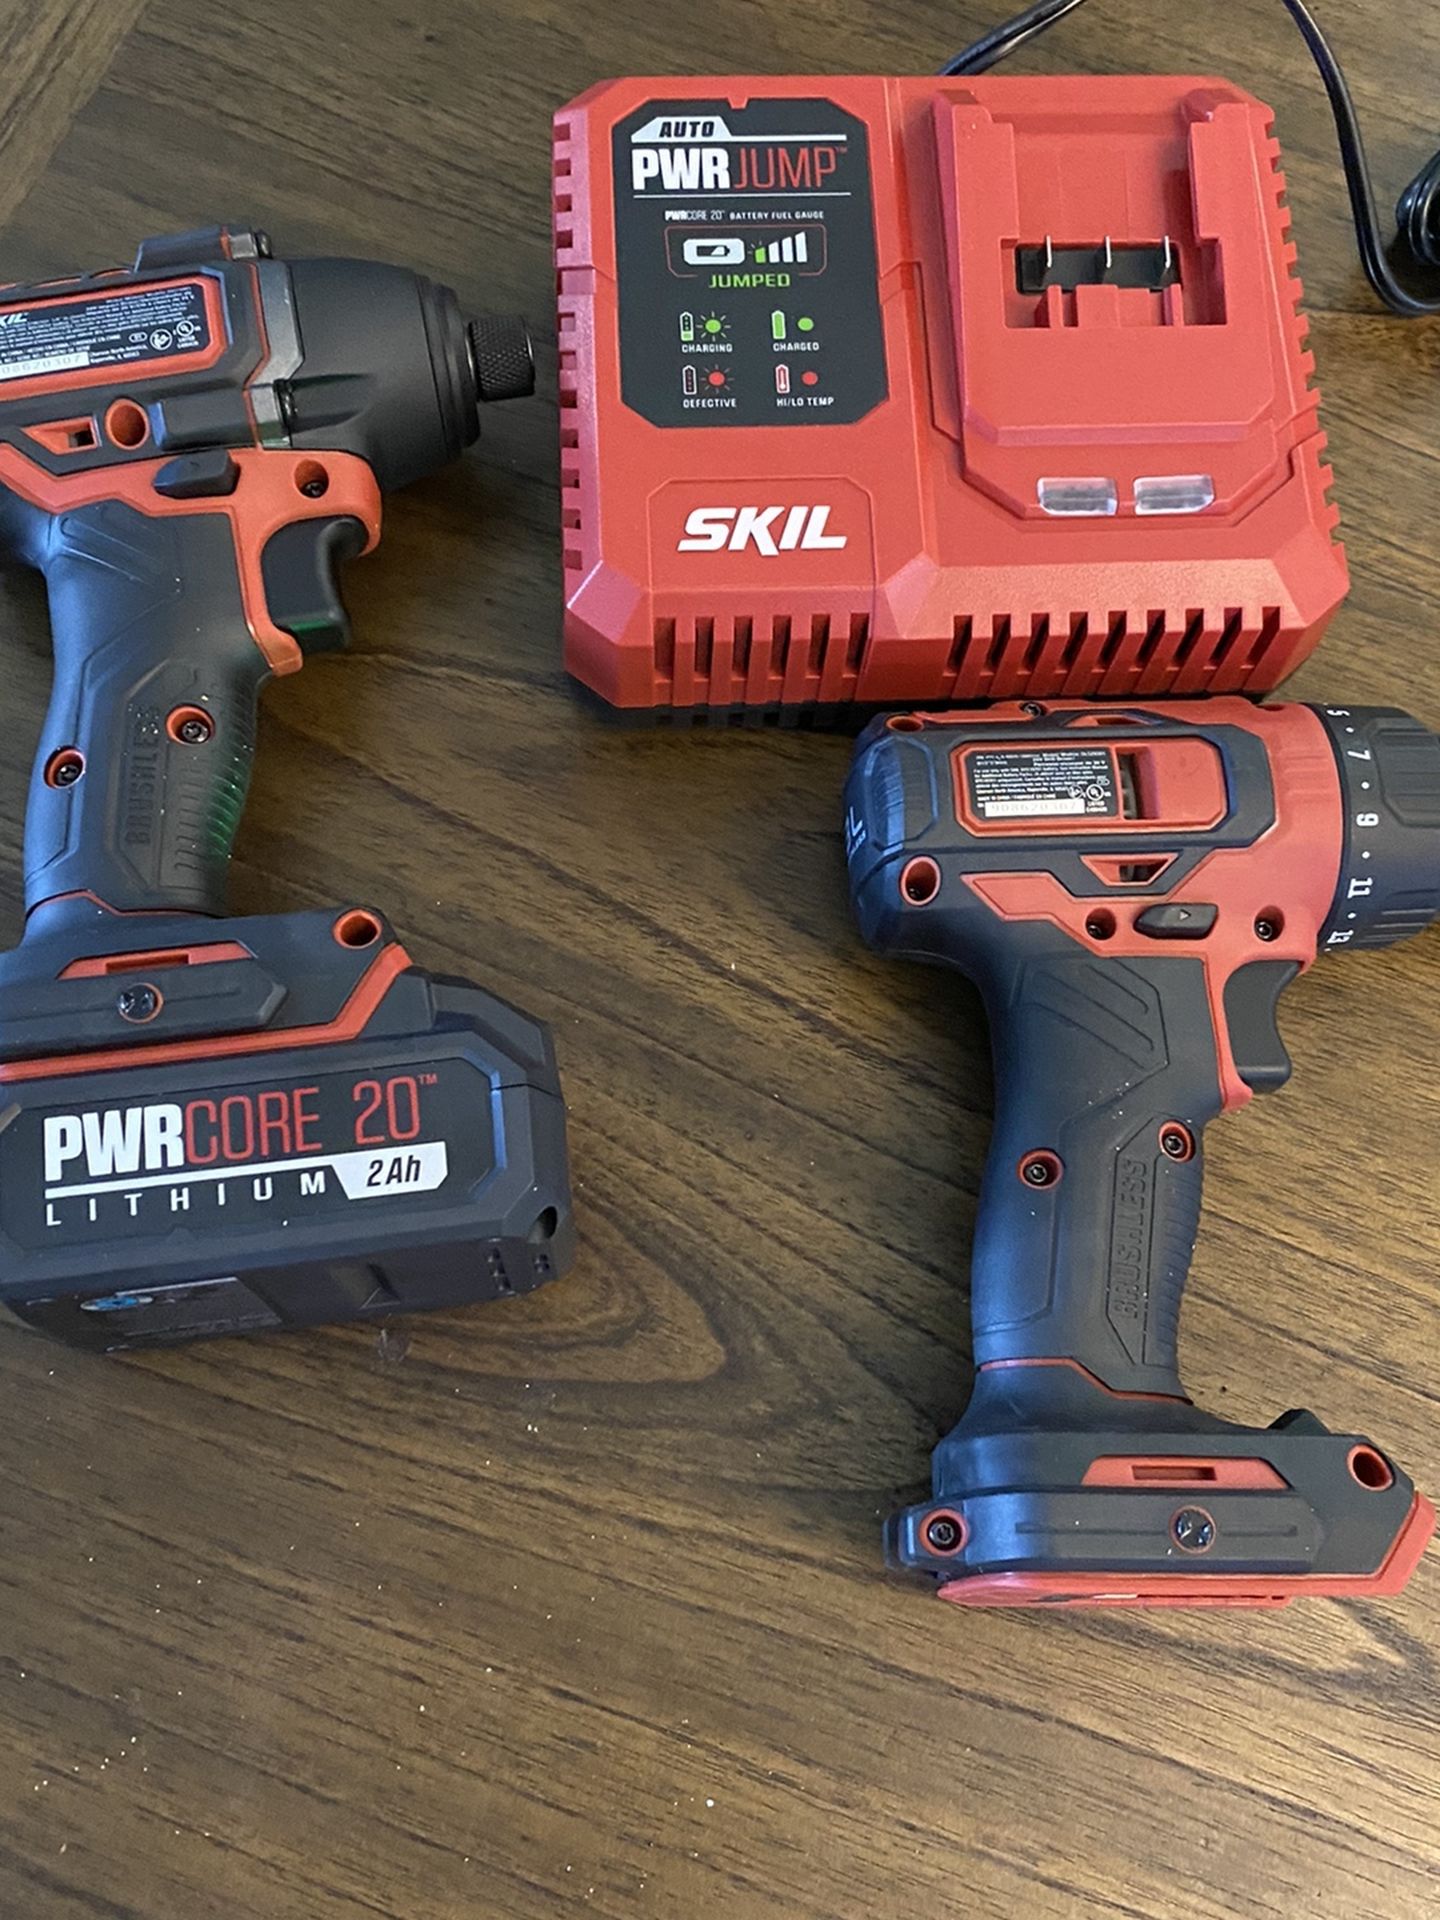 20v Brushless Drill, Impact Driver, Battery, And Charger (Skil Pwrcore 20)